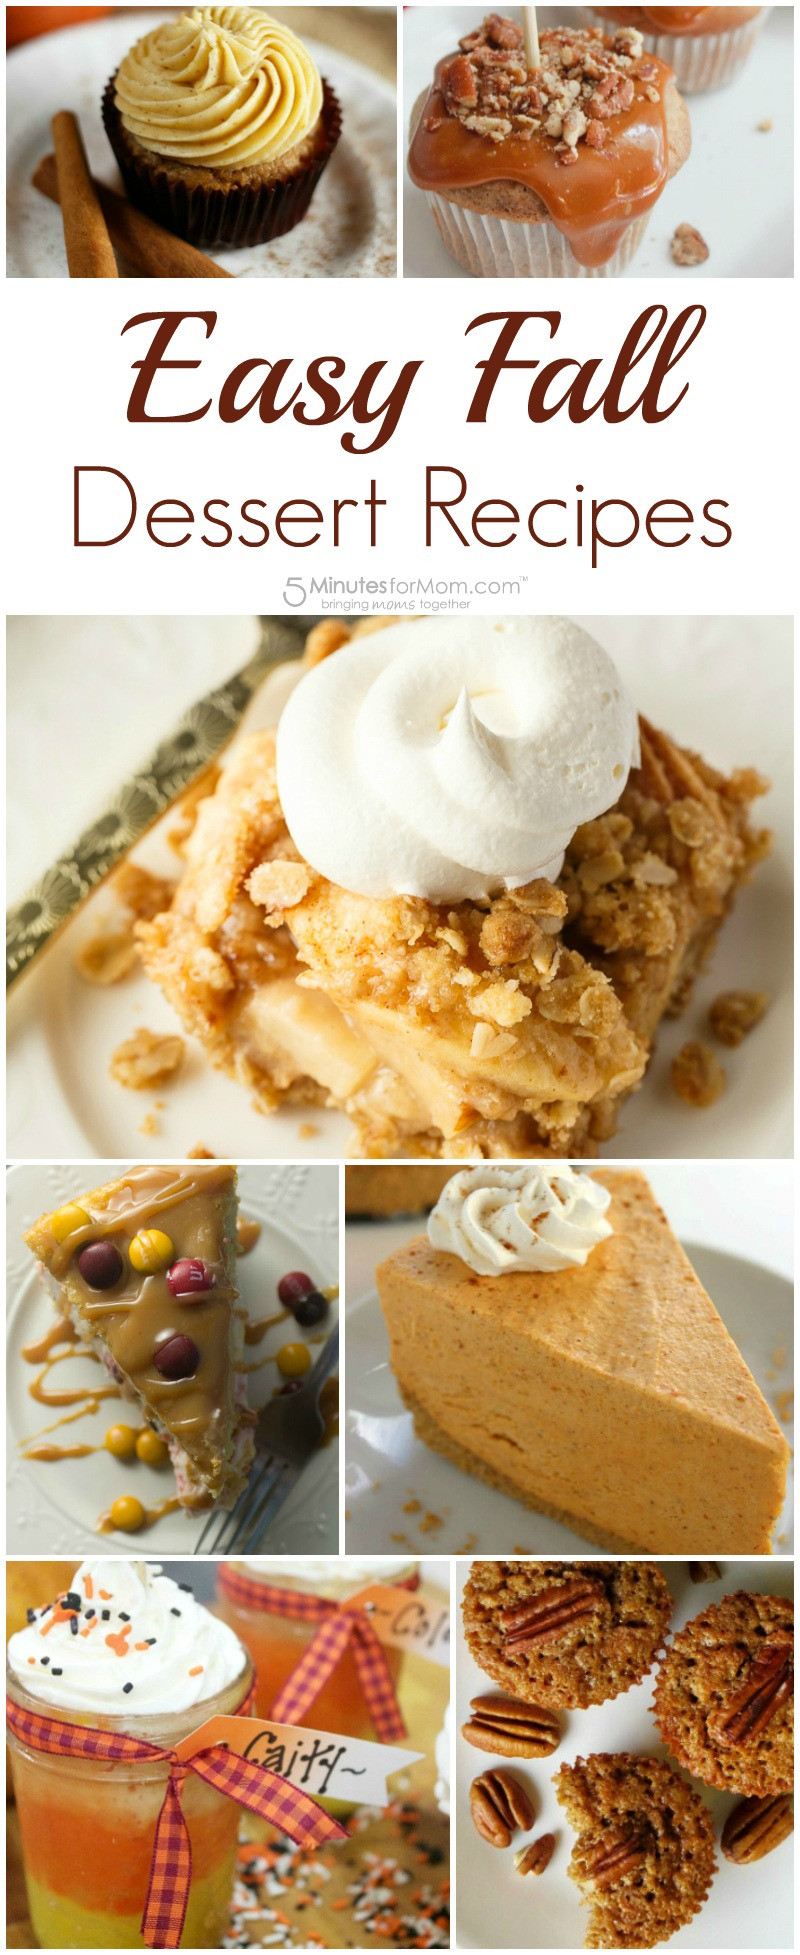 Good Easy Dessert Recipes
 Easy Fall Dessert Recipes and our Delicious Dishes Recipe